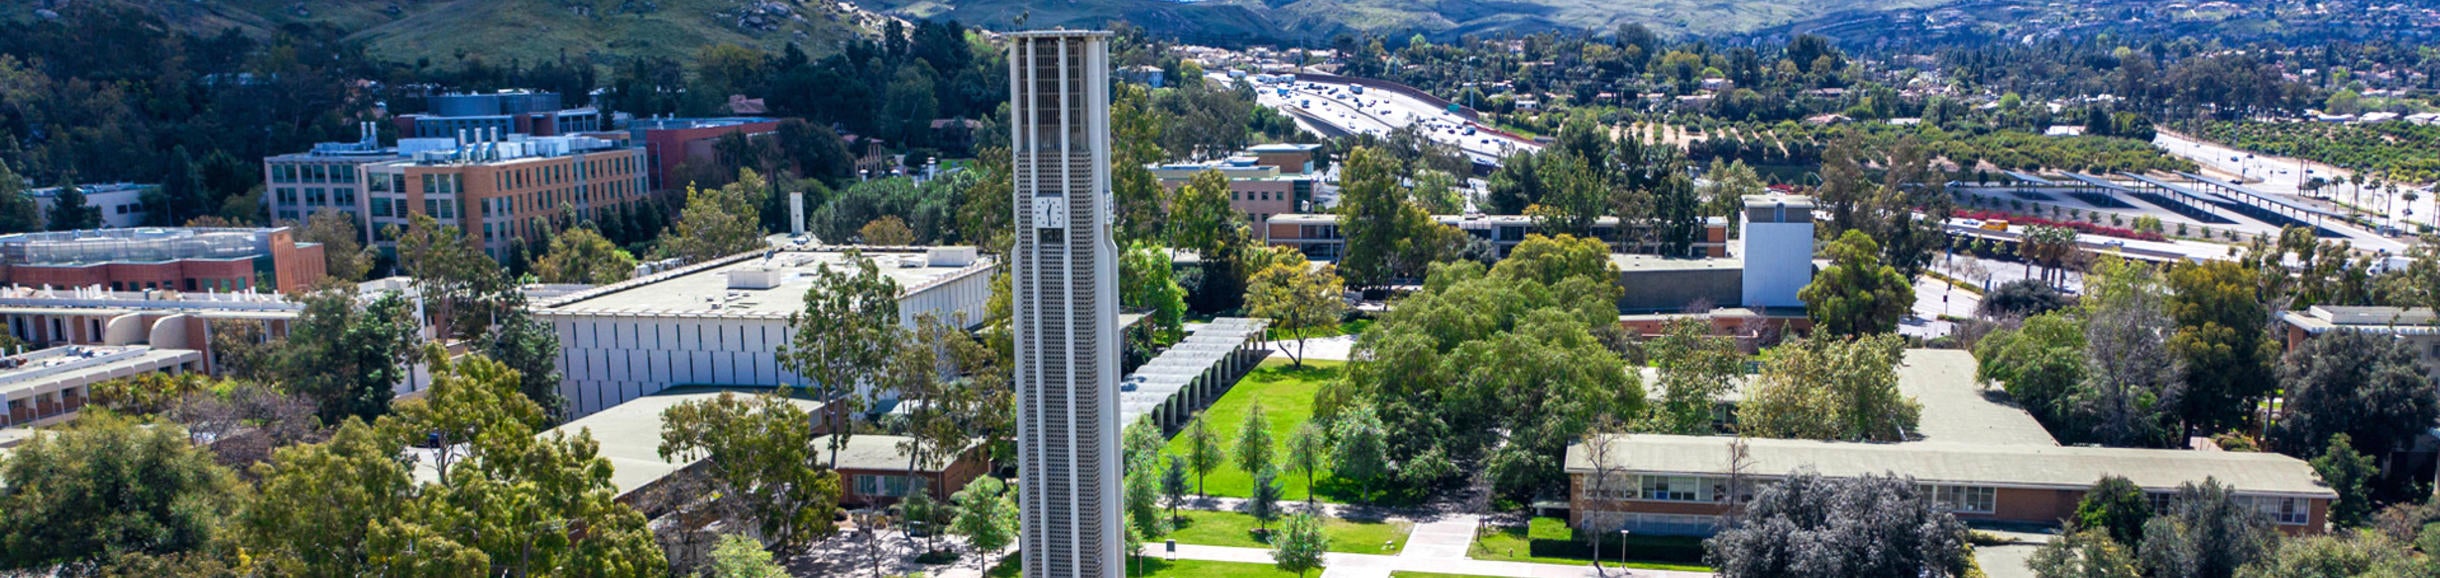 The UC Riverside campus with the Bell Tower in the forefront and the southern part of campus and the 215/60 freeway in the background